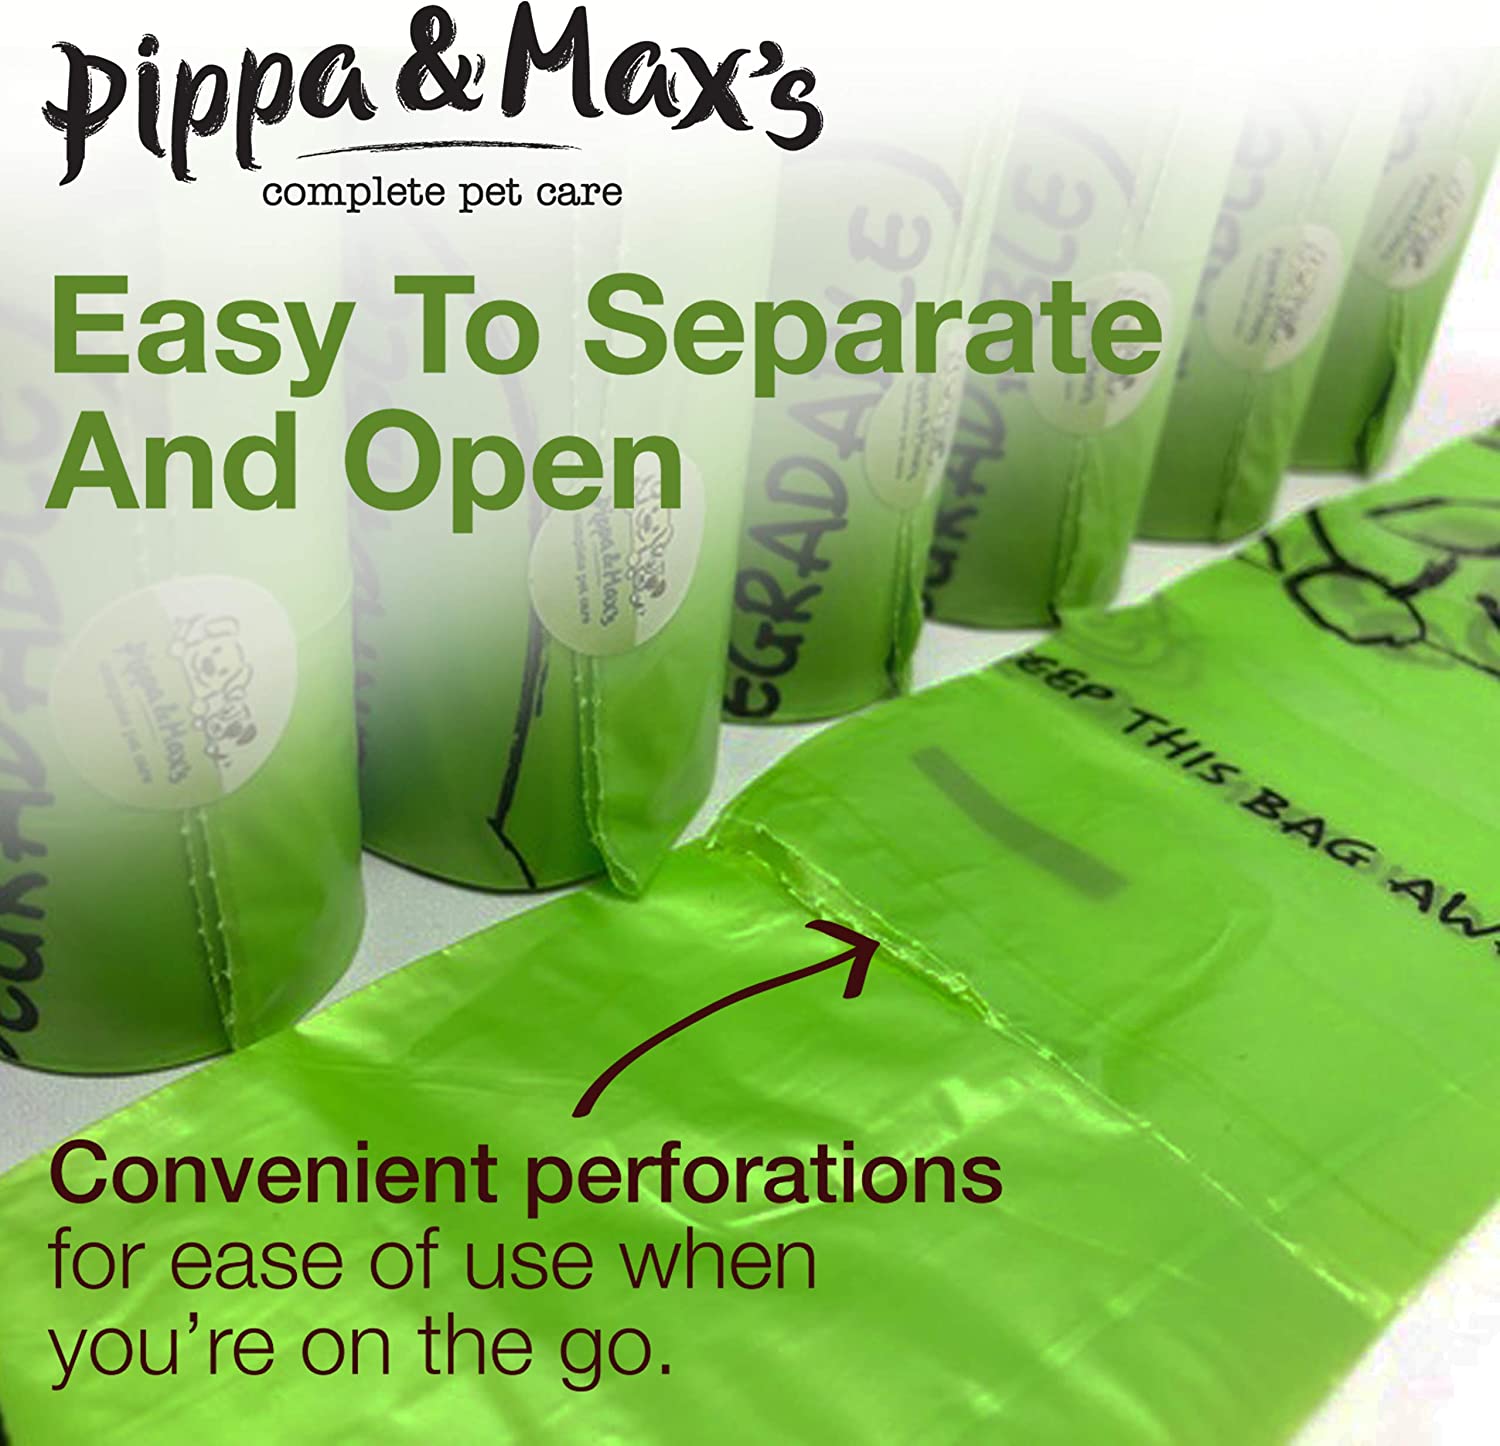 Pippa & Max's Extra Strong Dog Walking Poop Bags - Thick and Durable (450) for Hassle-free Cleanups